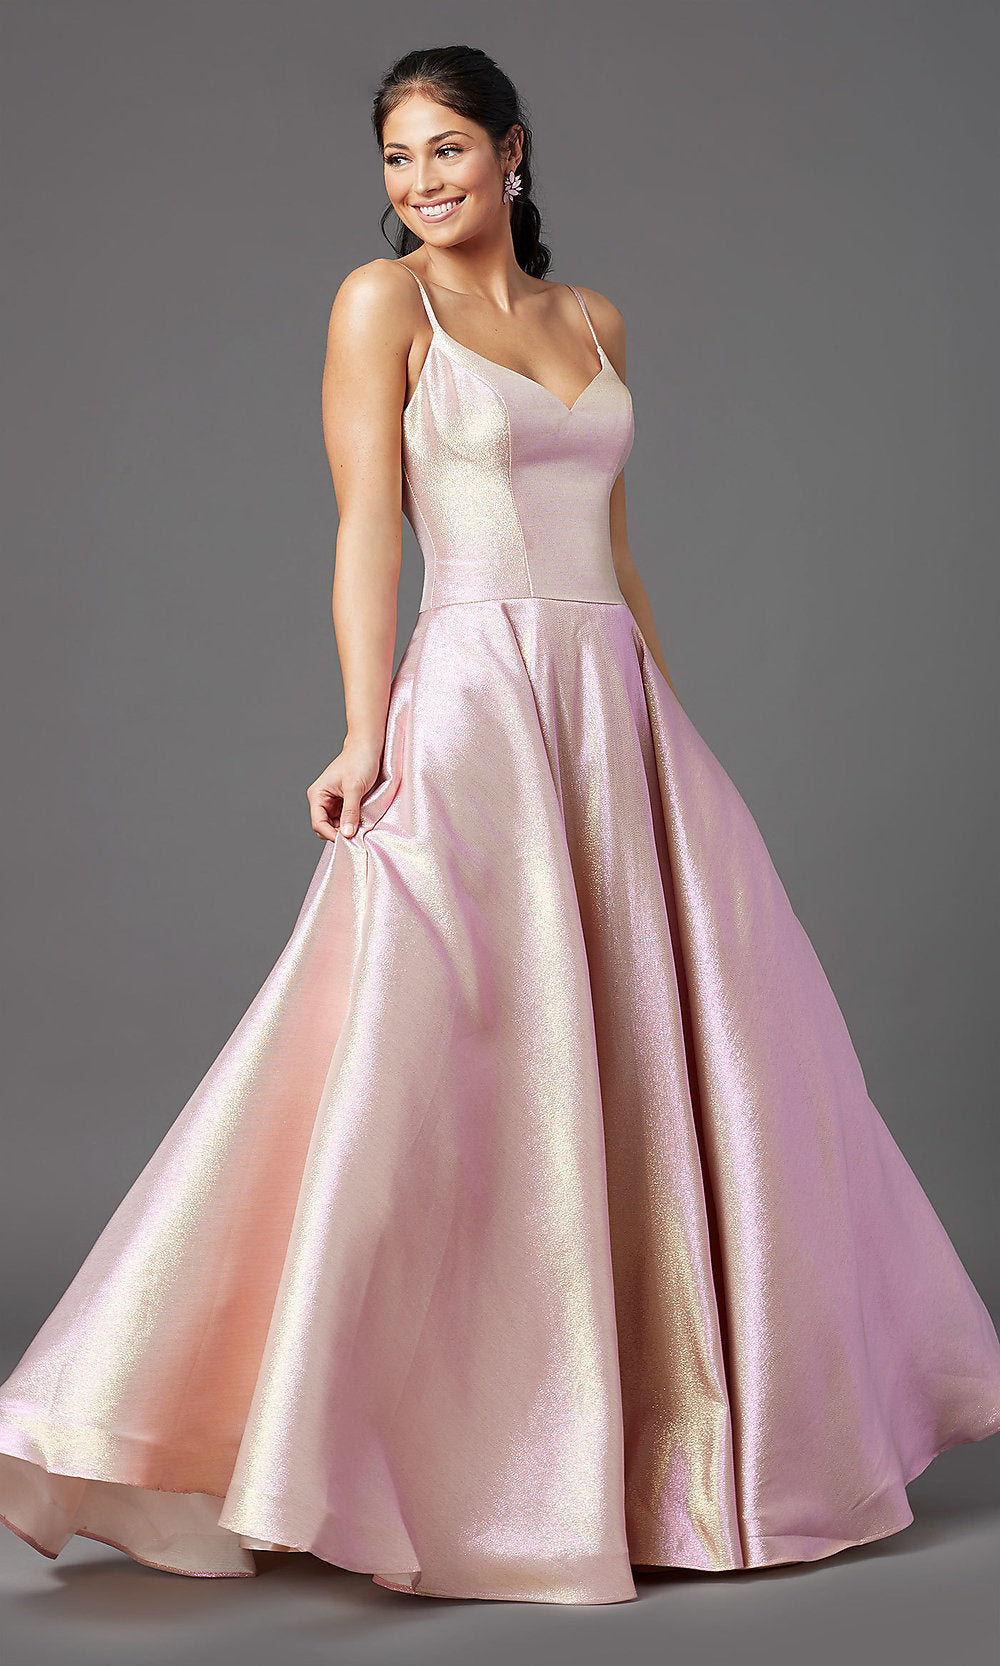  Long Glitter A-Line Formal Prom Dress by PromGirl